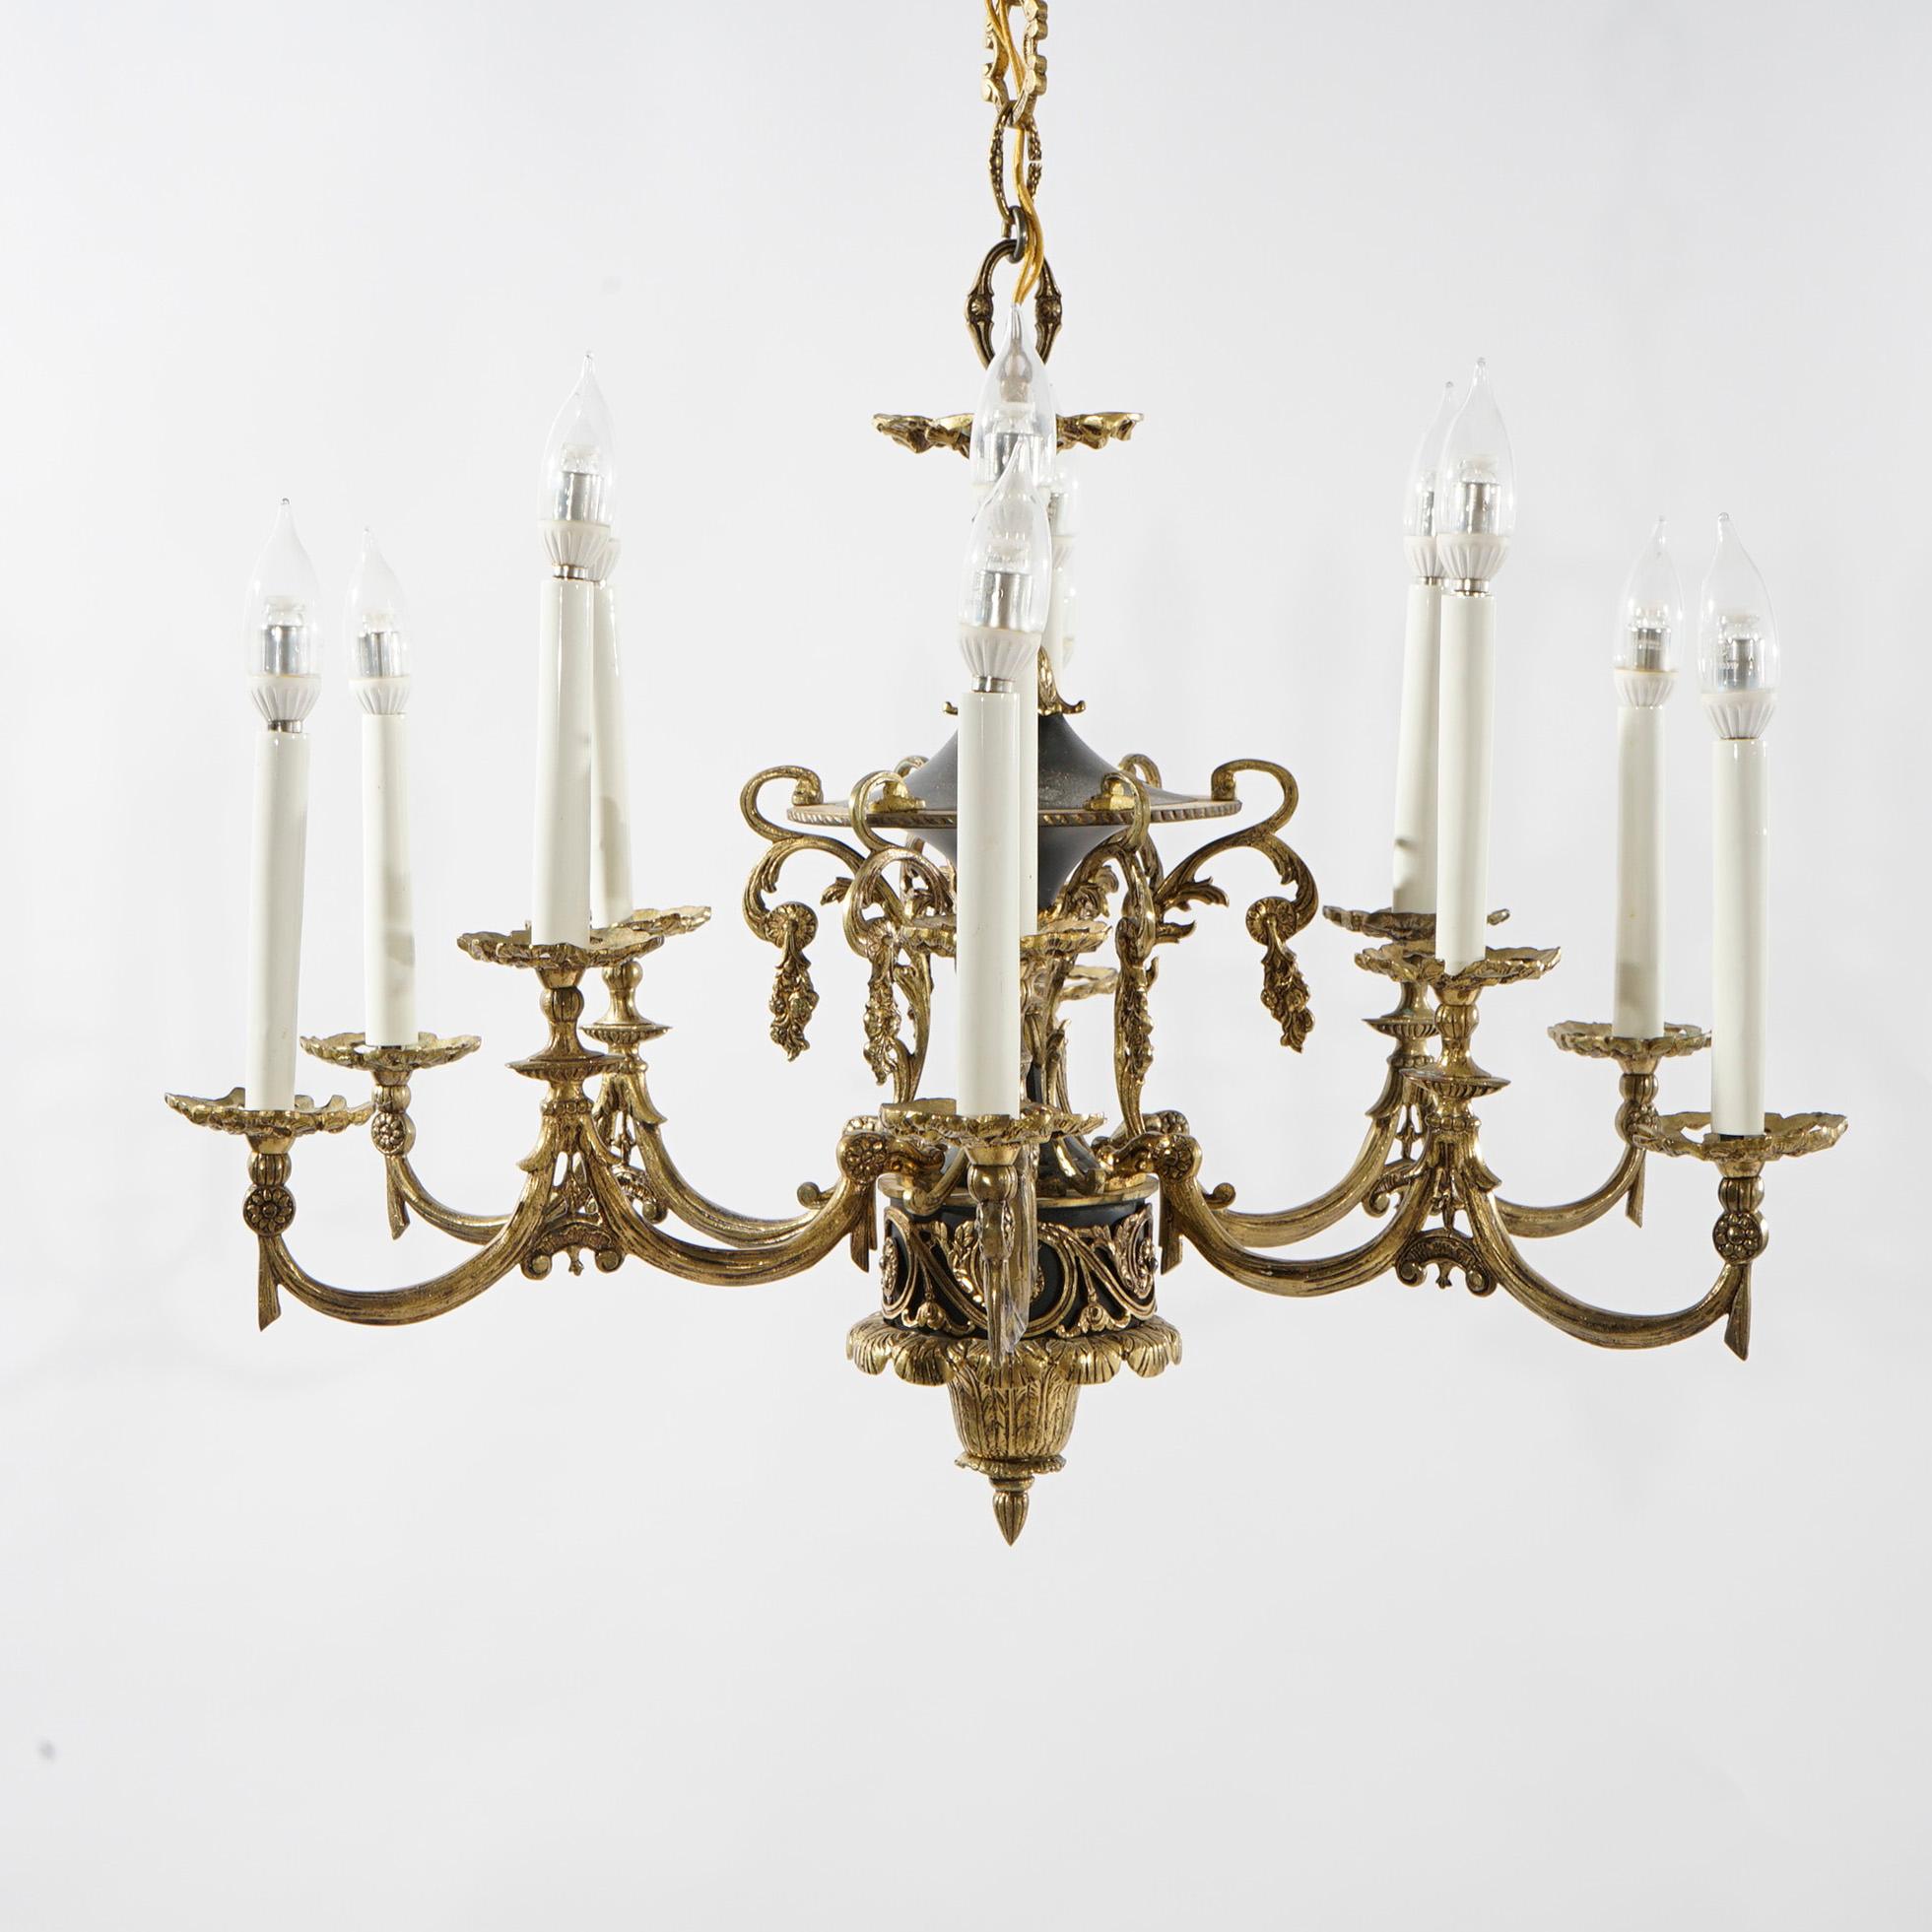 Antique French Empire Style Ebonized Bronze Twelve-Light Chandelier, Early 20thC For Sale 1